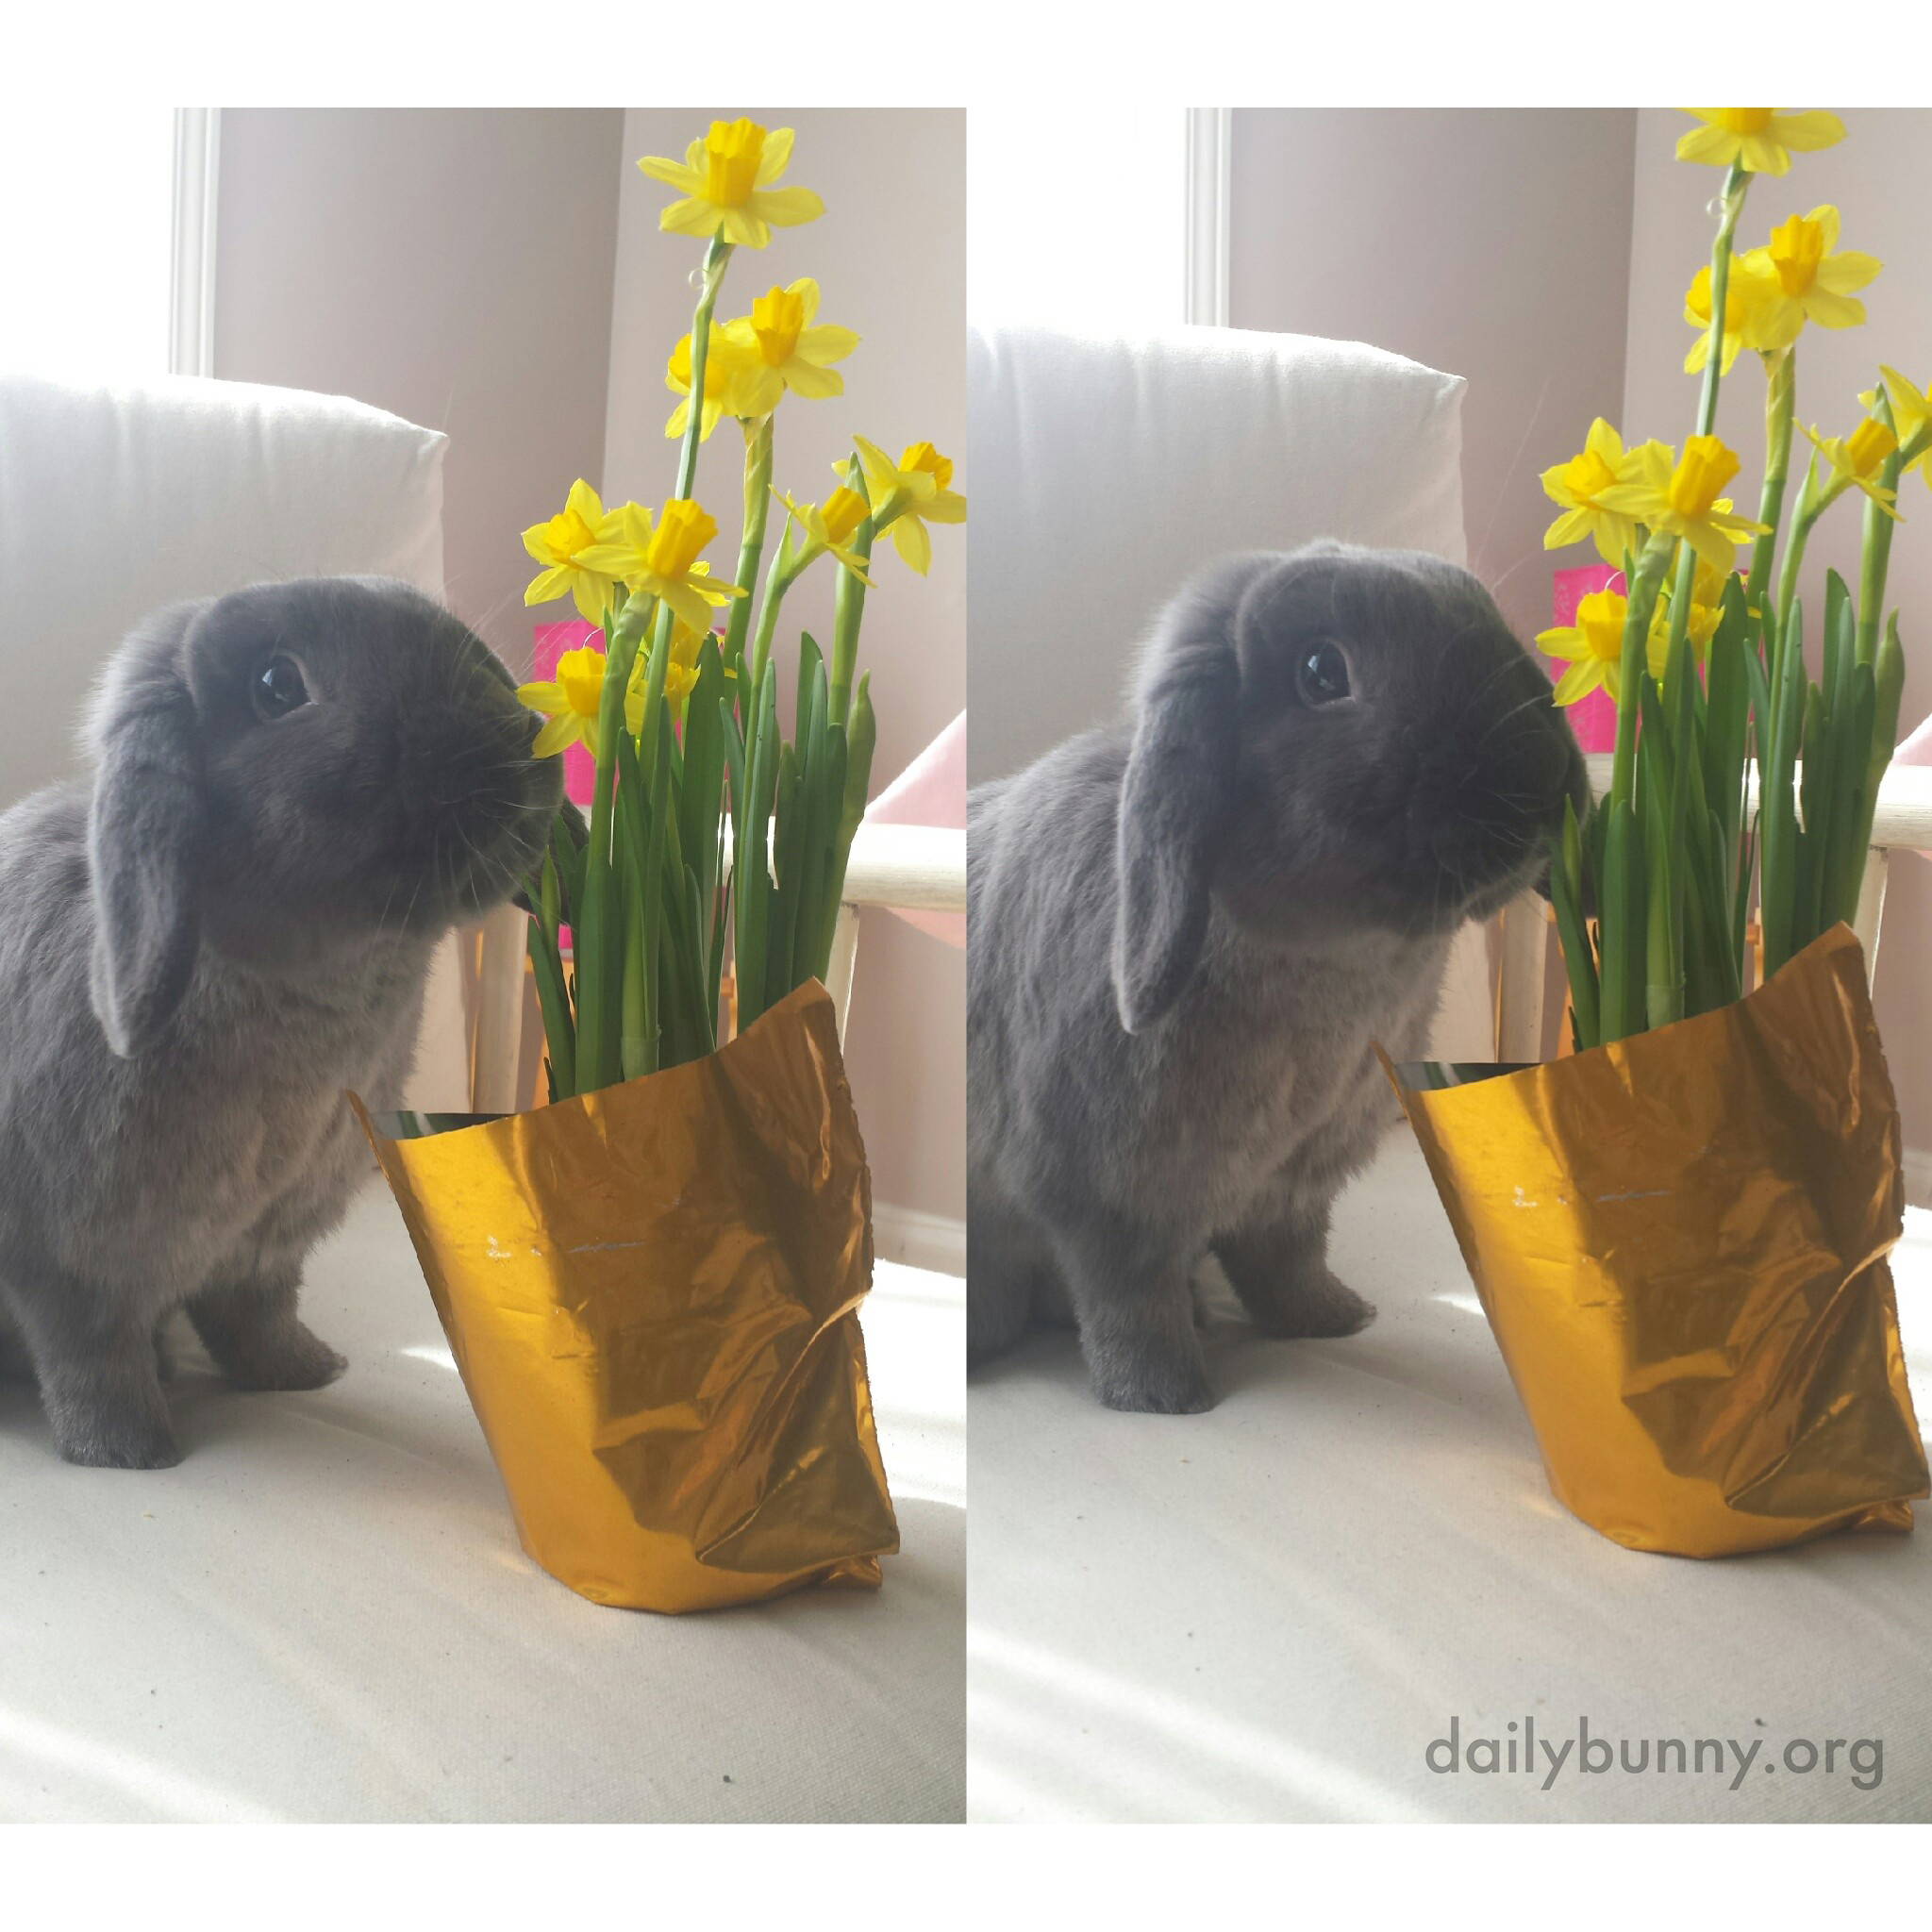 Bunny Thinks Flowers Are Nice, But They're Better When They're Edible